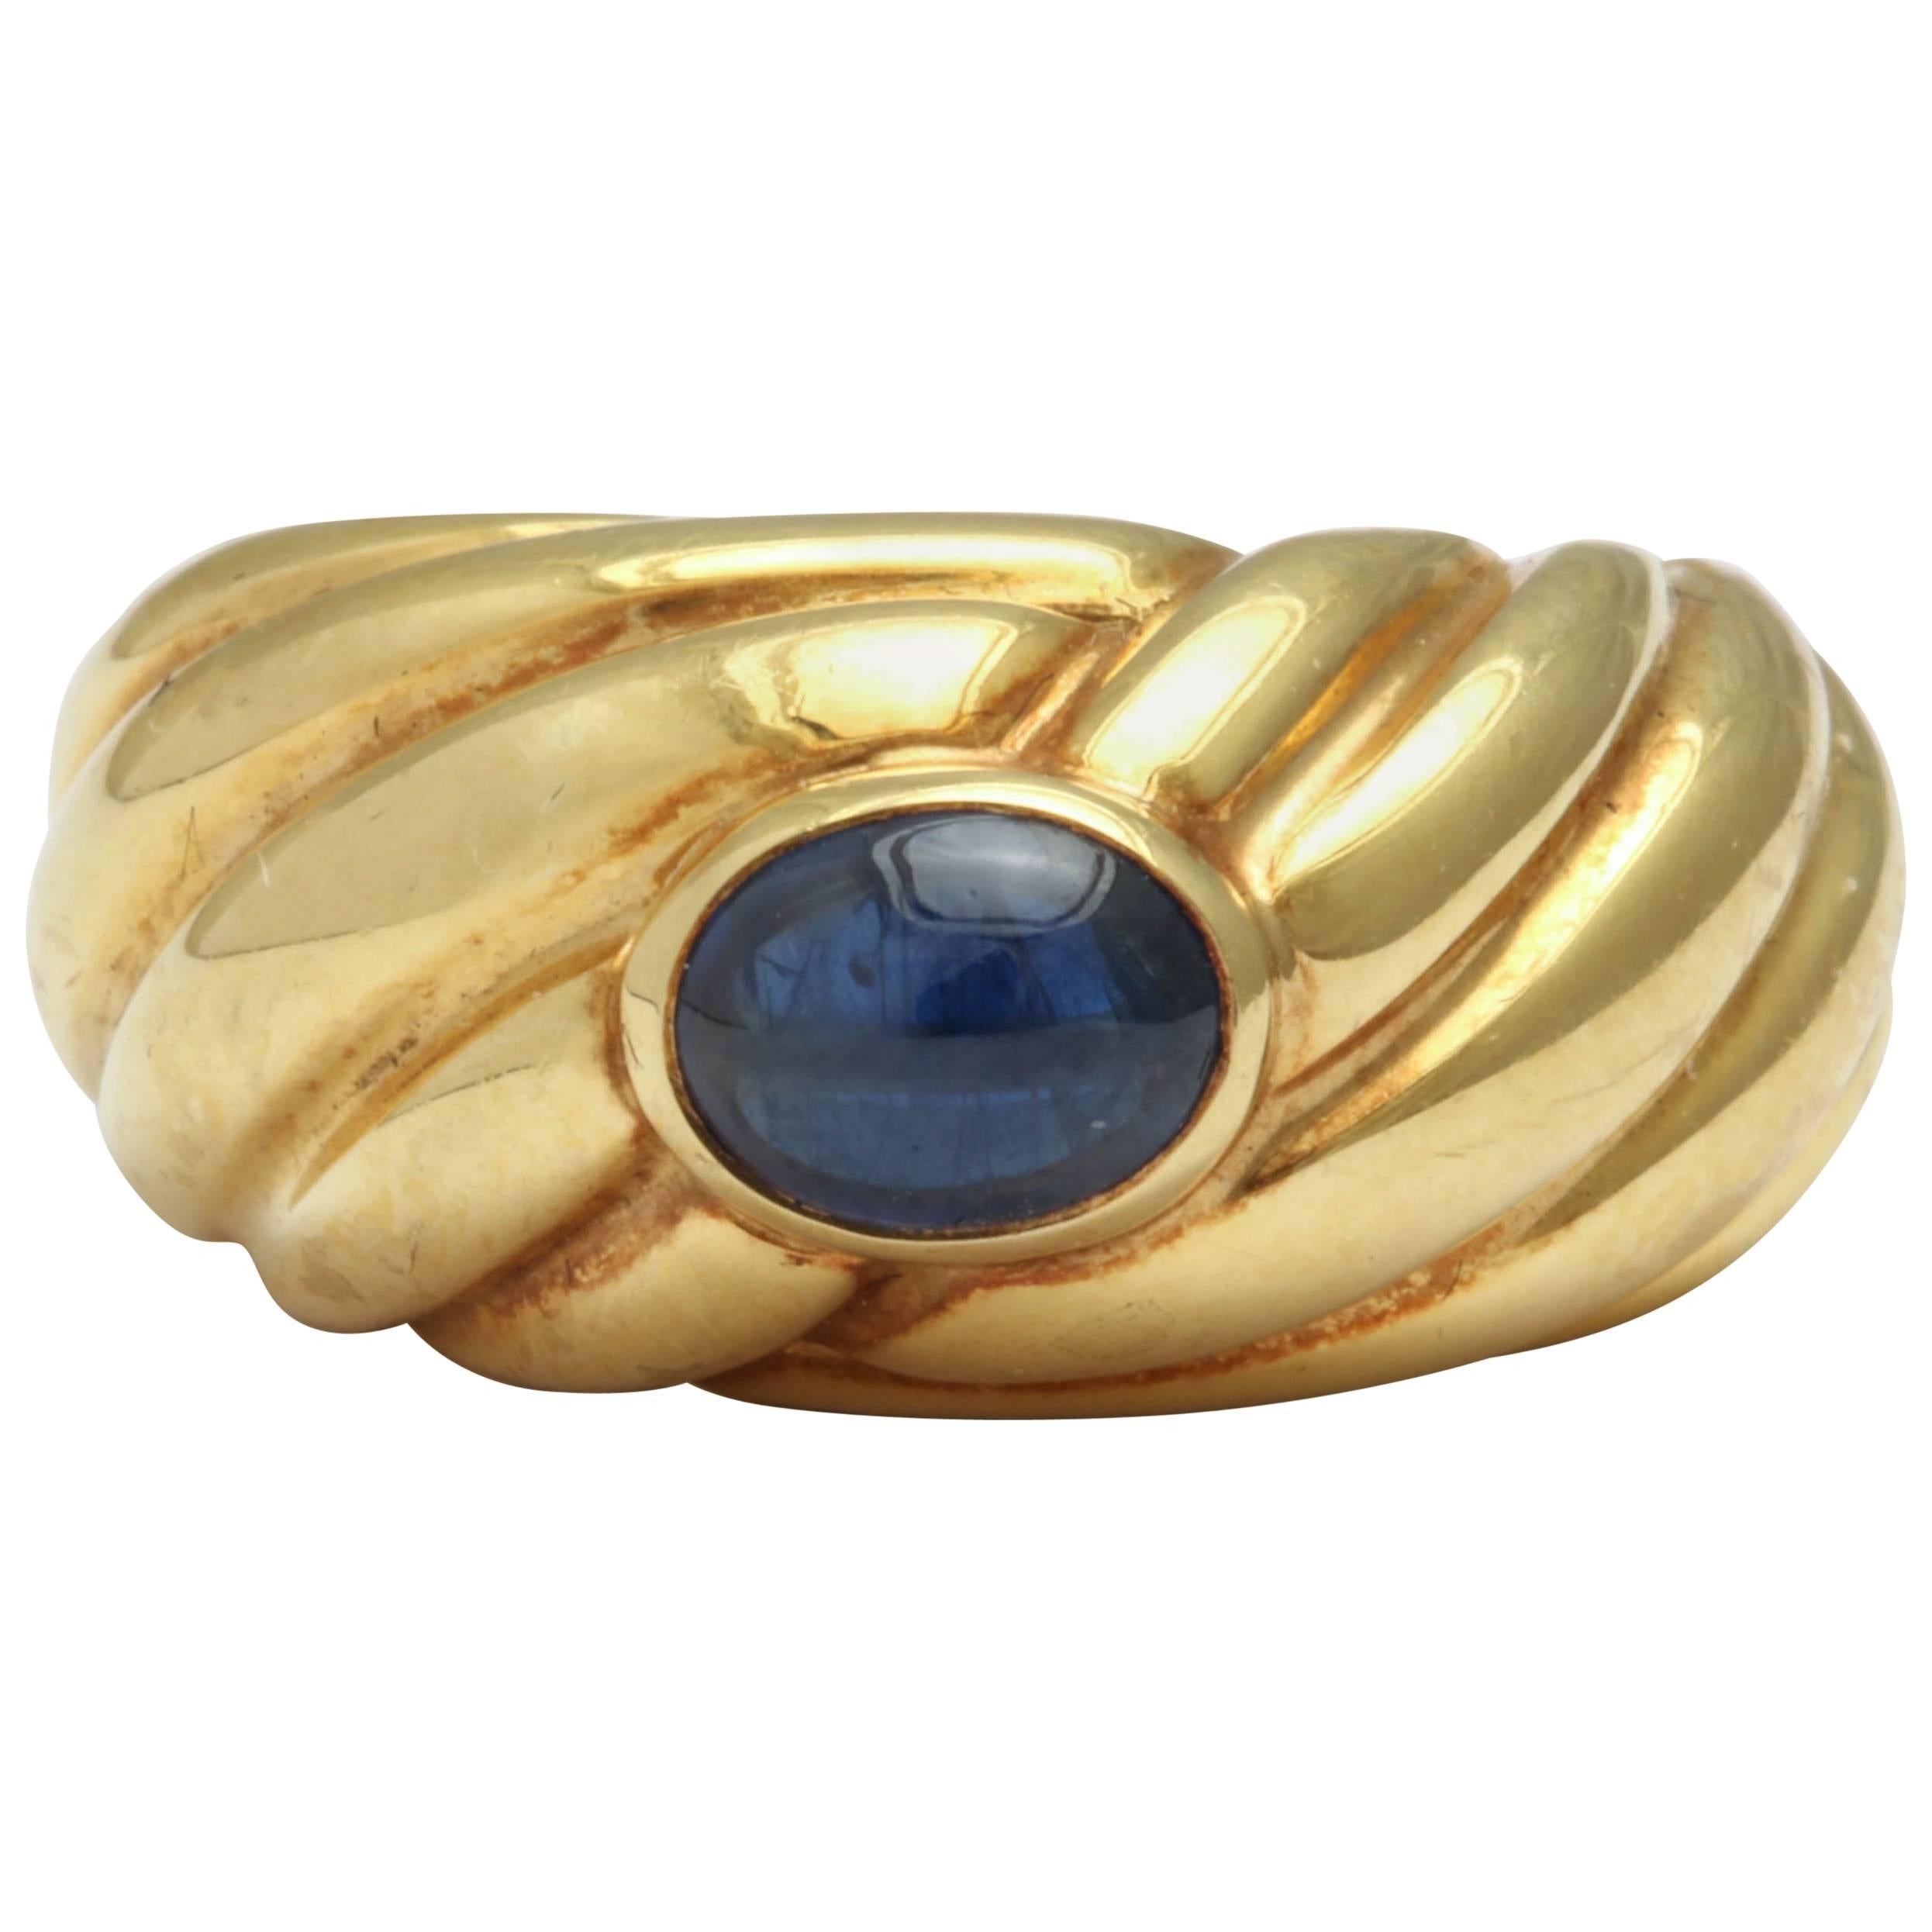  Cabochon Sapphire and Yellow Gold Ring signed Fred